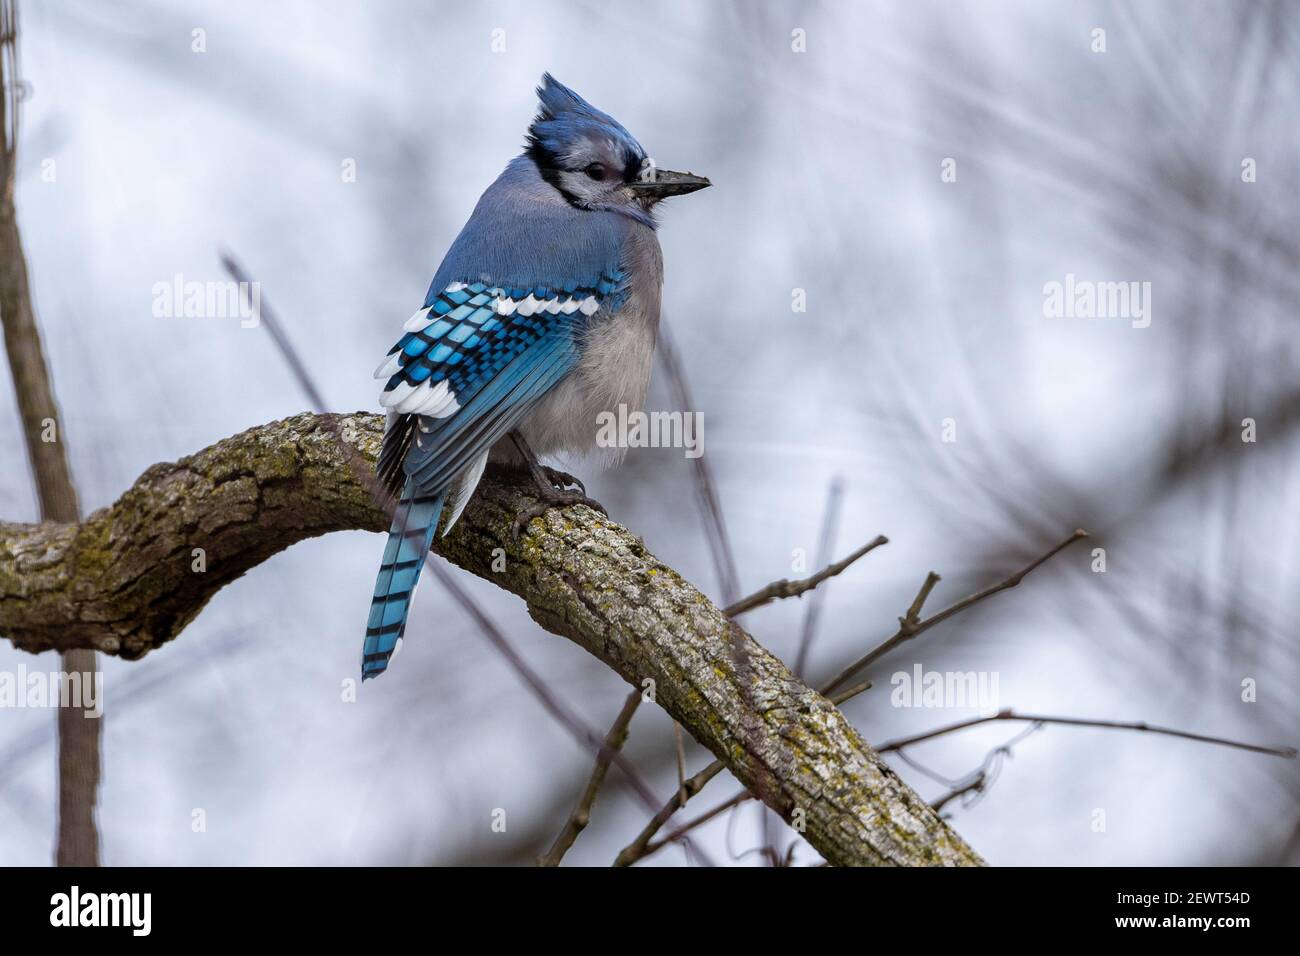 A closeup shot of a cute Blue Jay sitting on a tree branch Stock Photo